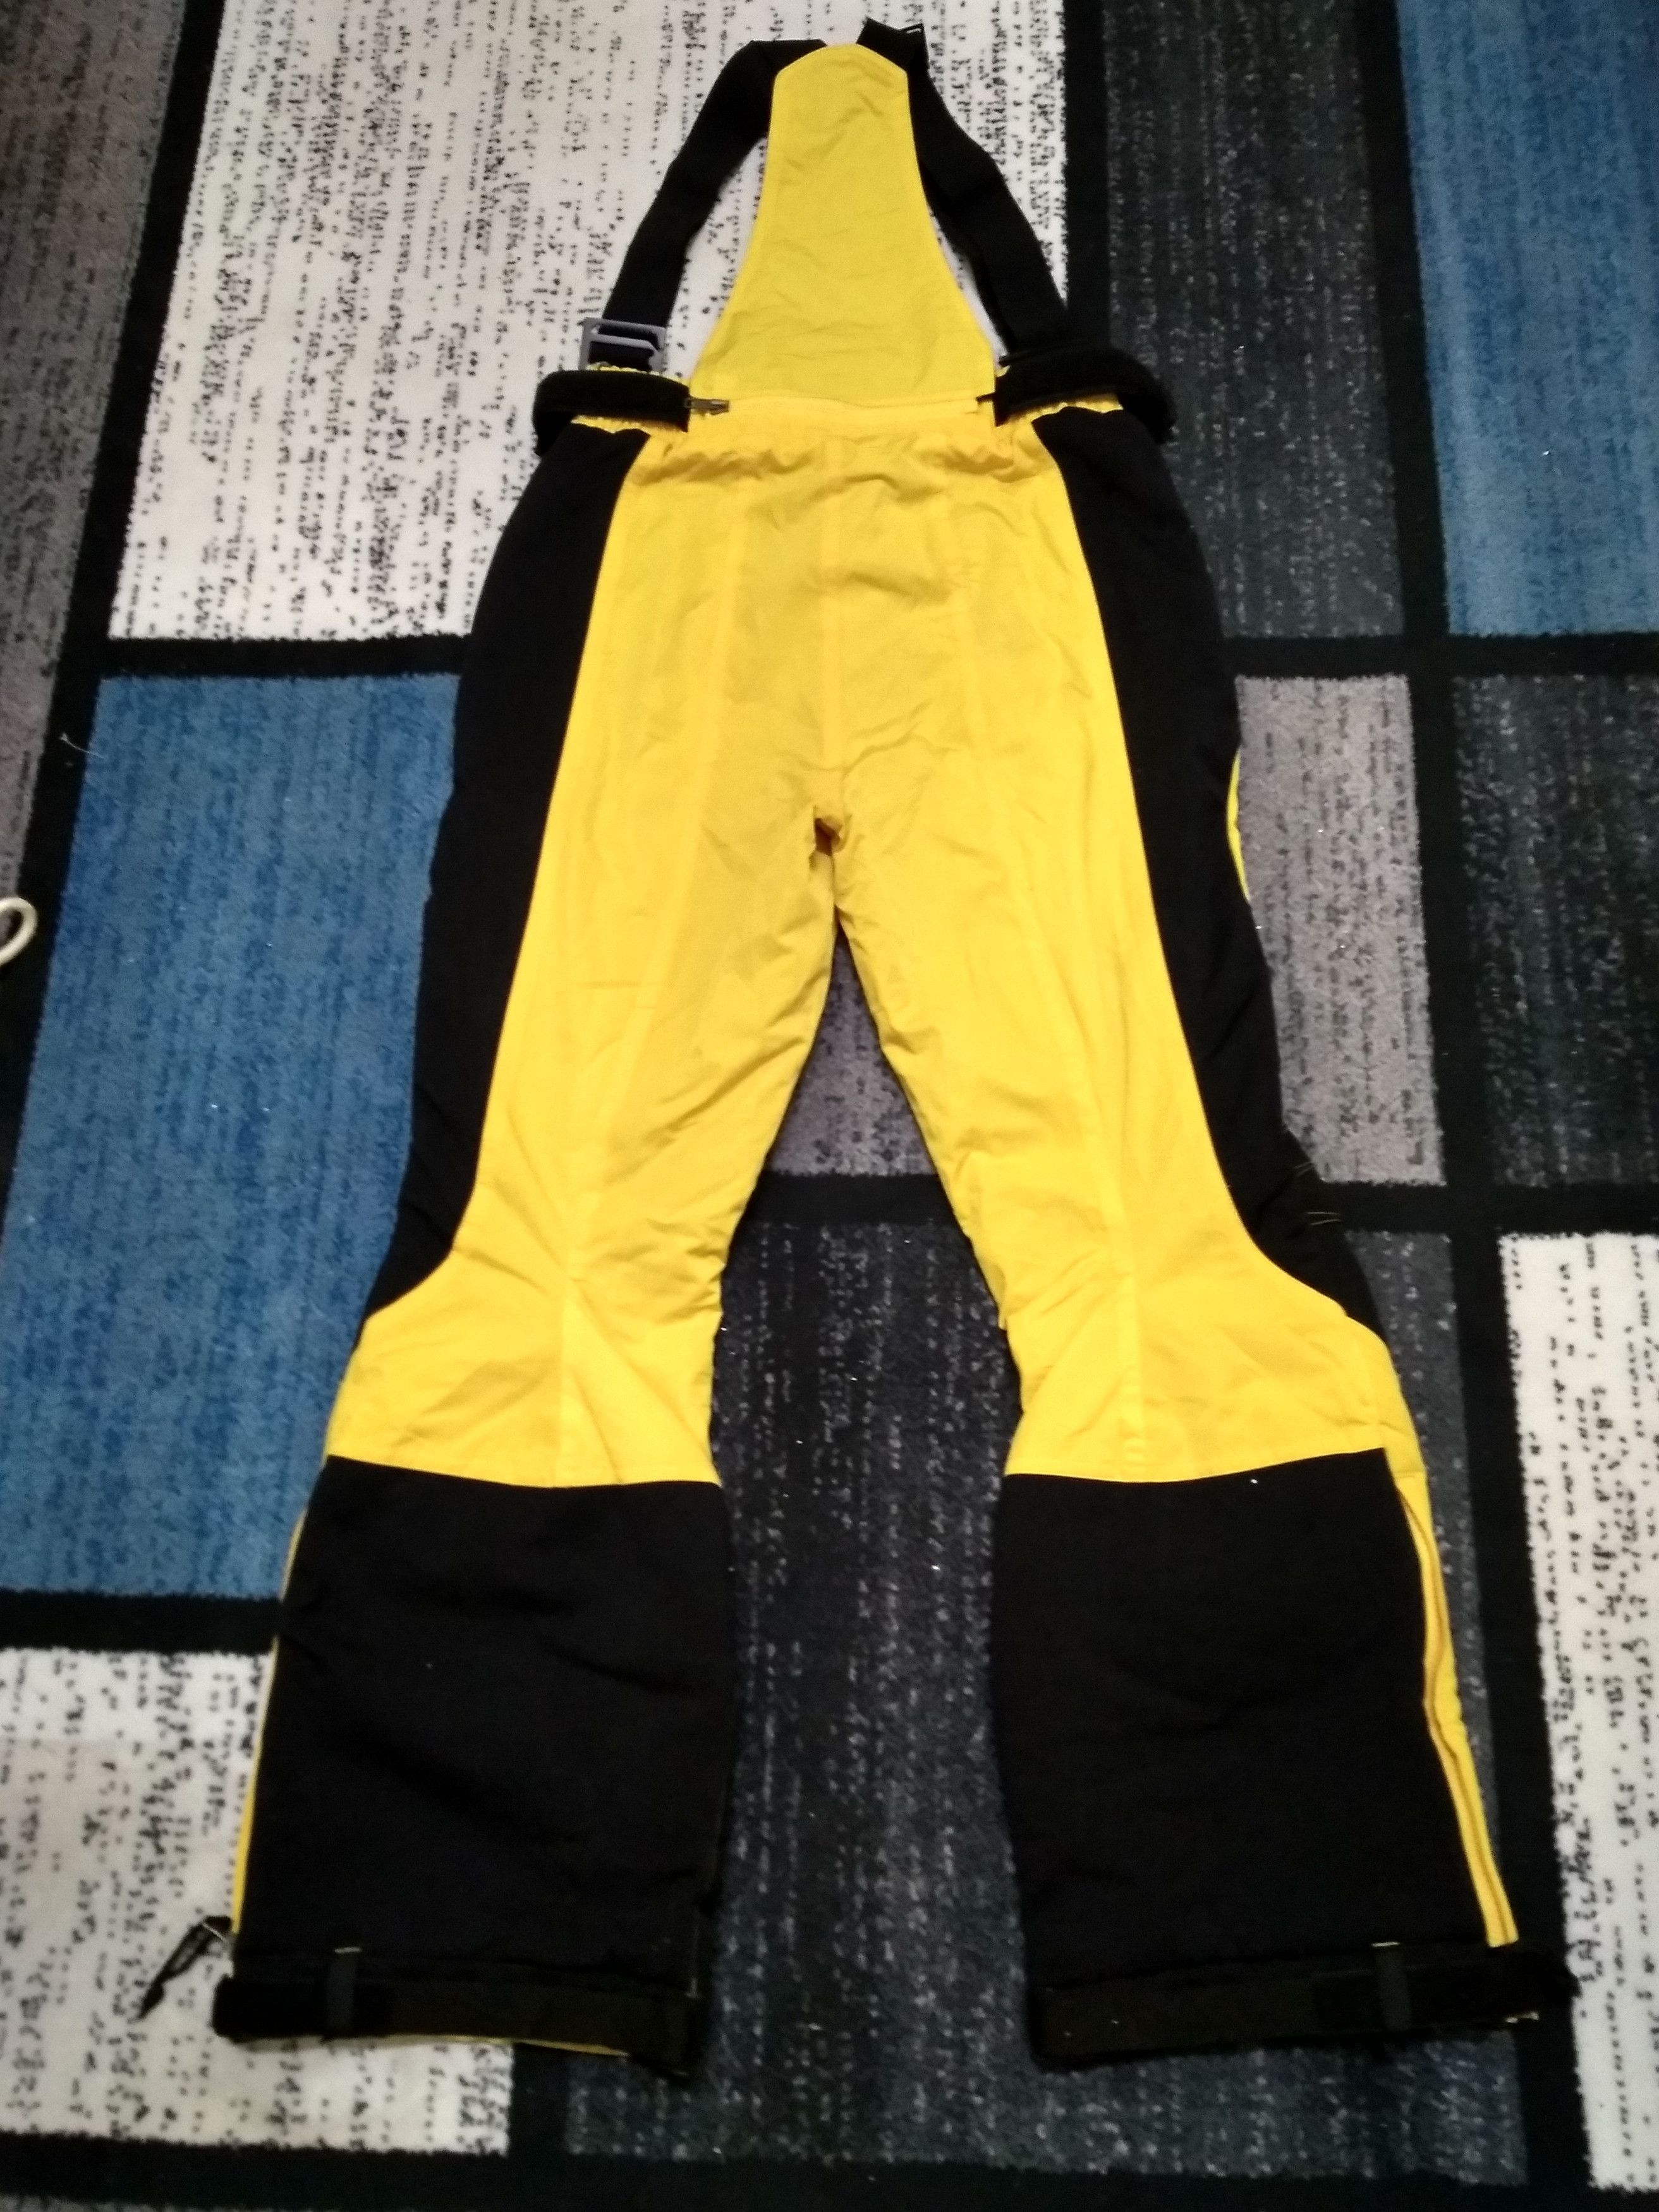 The North Face The North Face Overall Skiwear Size US 33 - 2 Preview